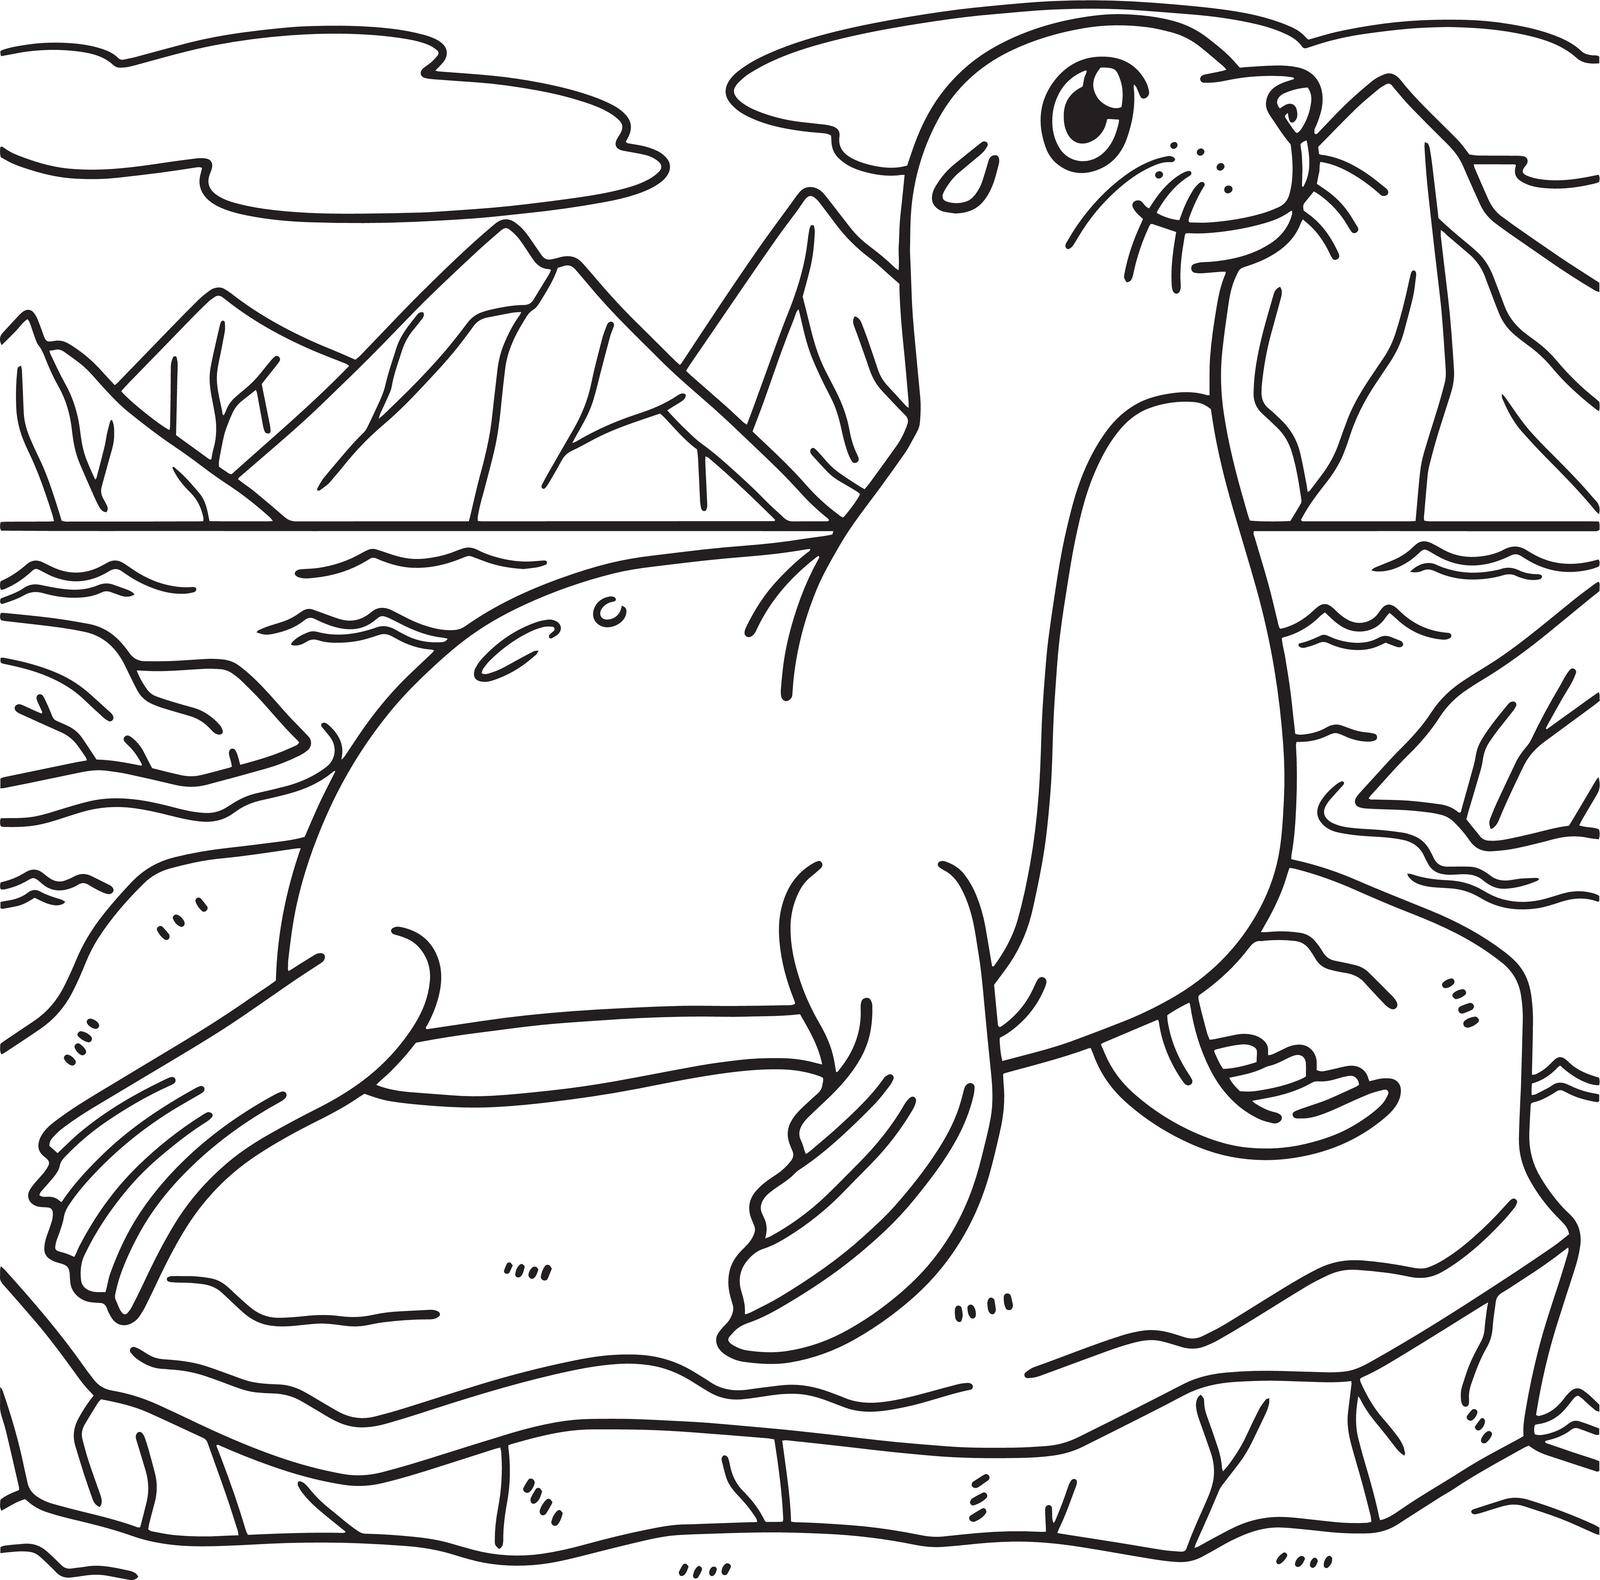 A cute and funny coloring page of a Seal. Provides hours of coloring fun for children. To color, this page is very easy. Suitable for little kids and toddlers.